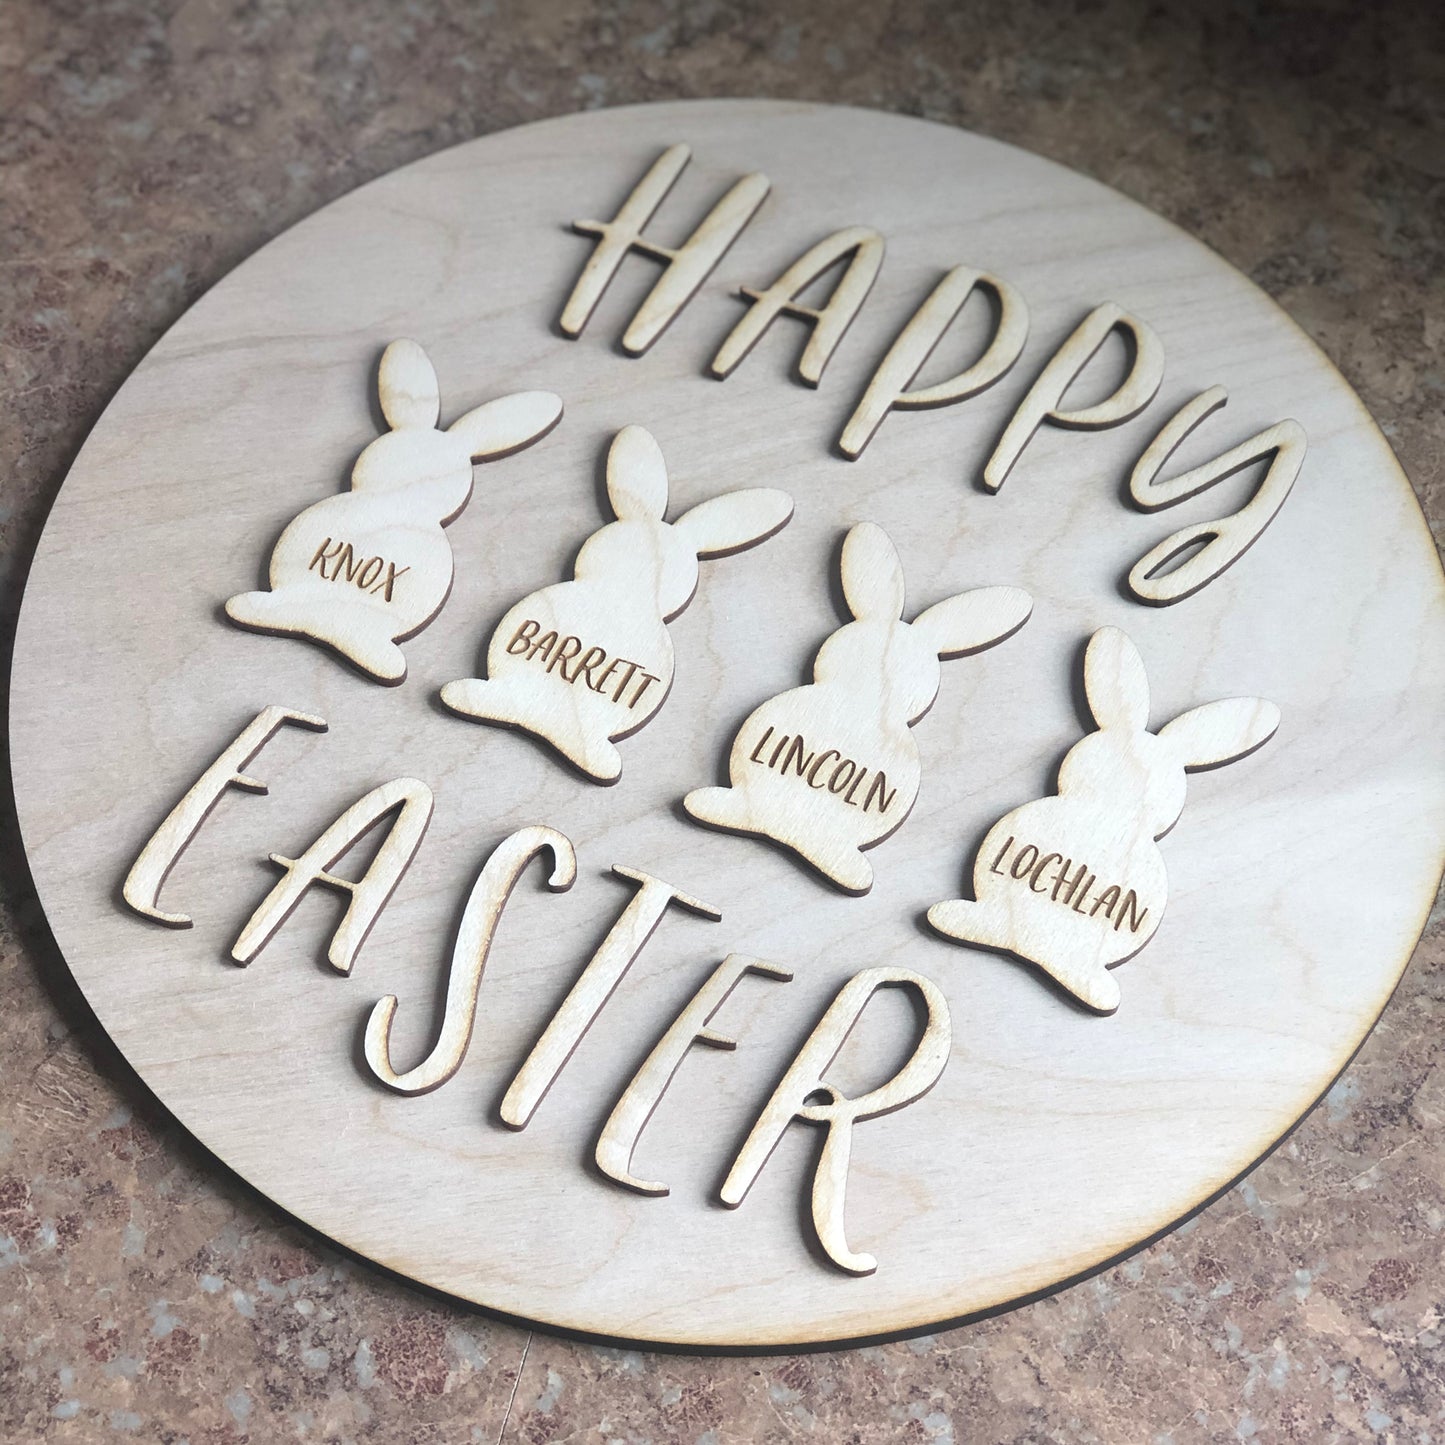 DIY Wood Sign Kit | Happy Easter - Intricut Creations